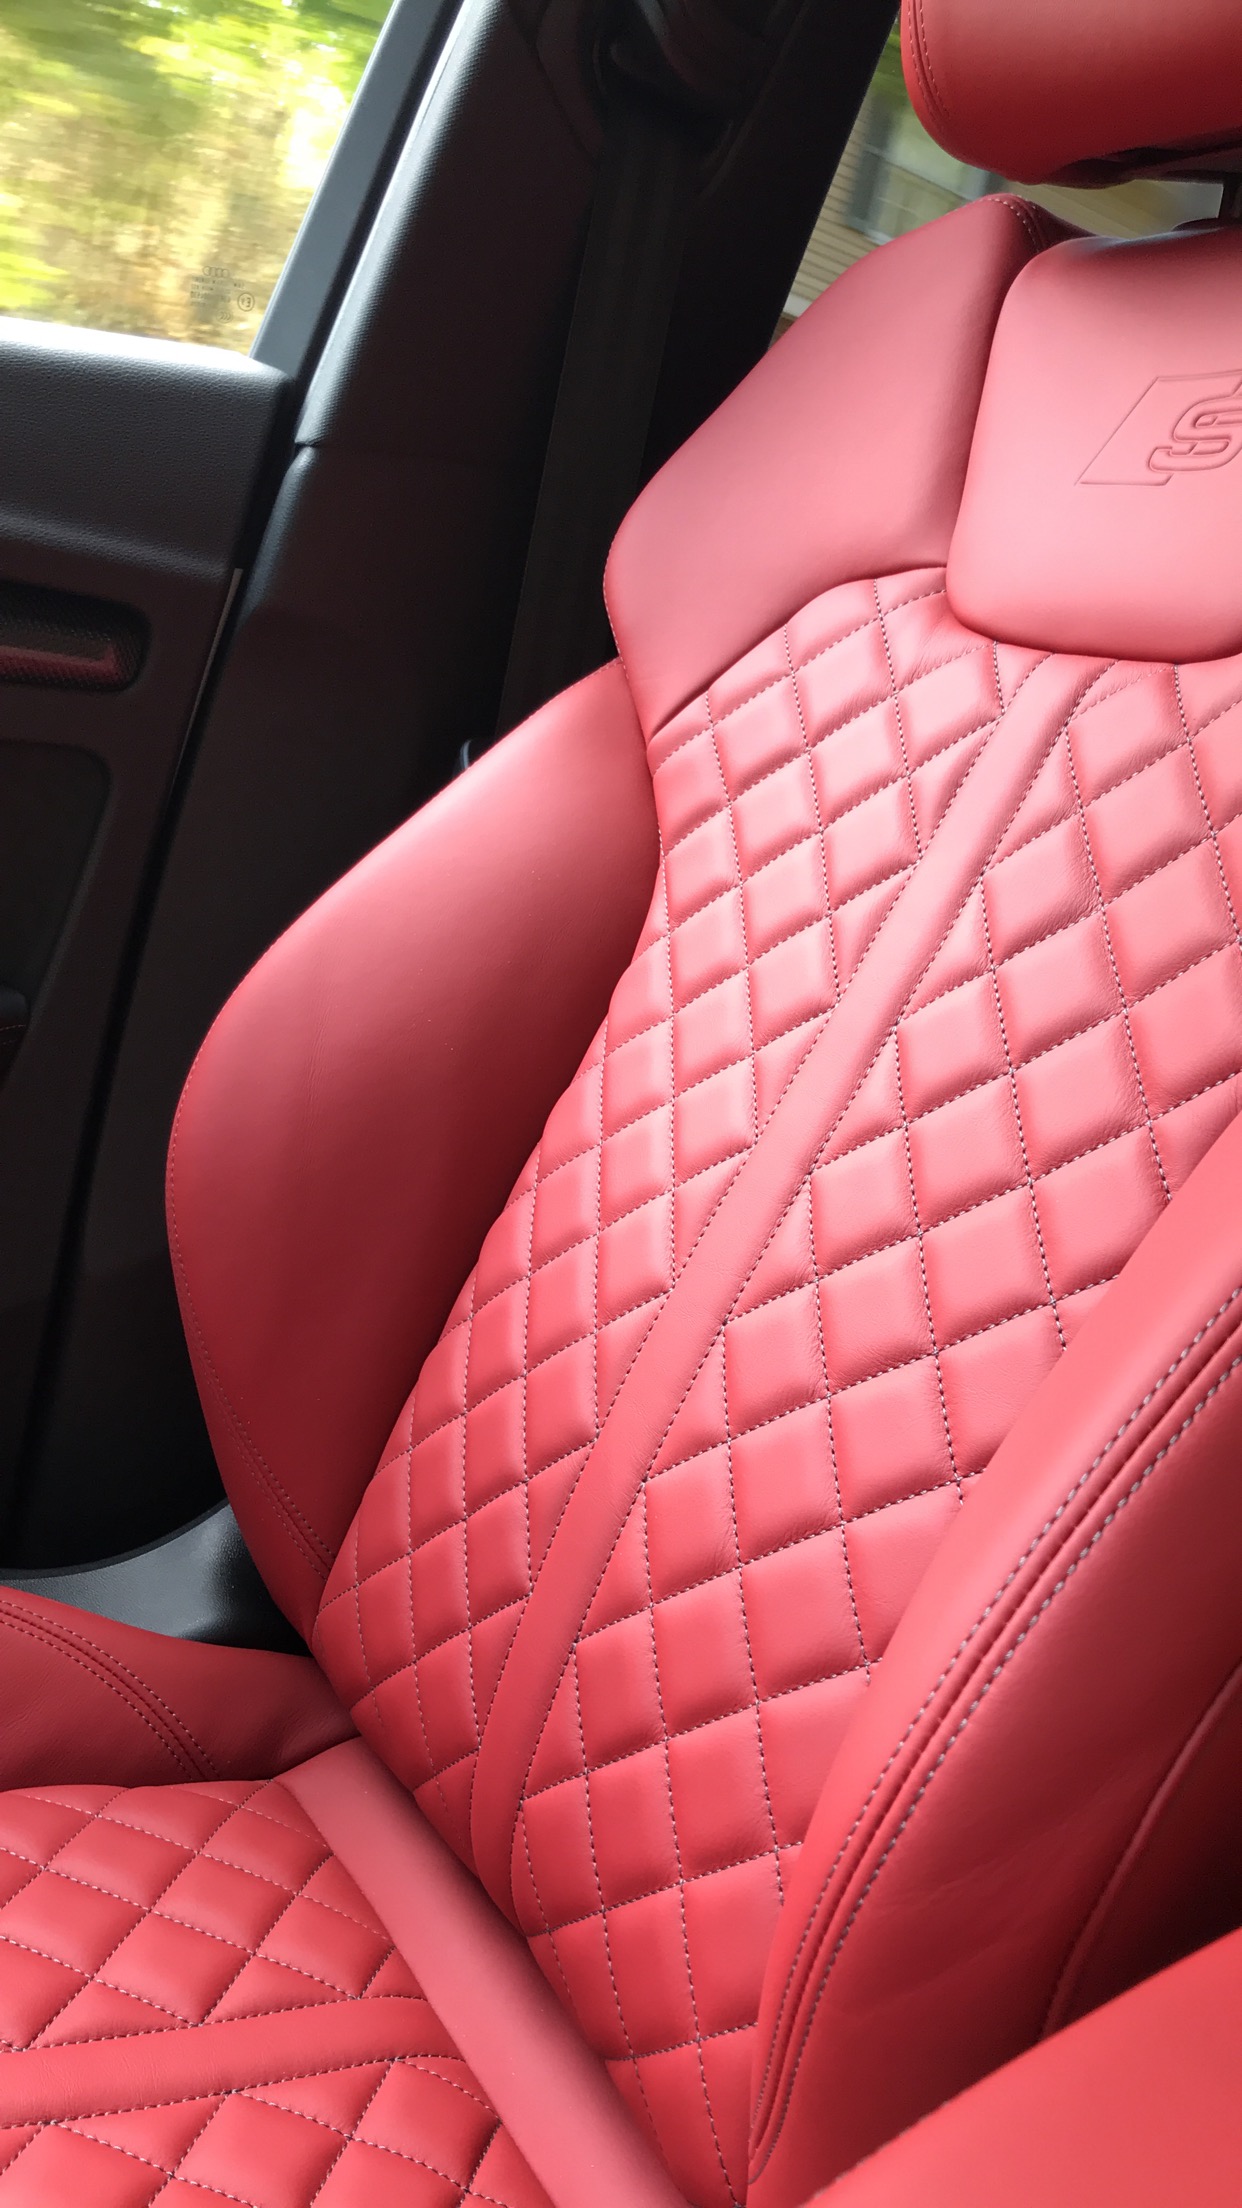 Q5 Or Sq5 With Red Leather Interior Audiworld Forums